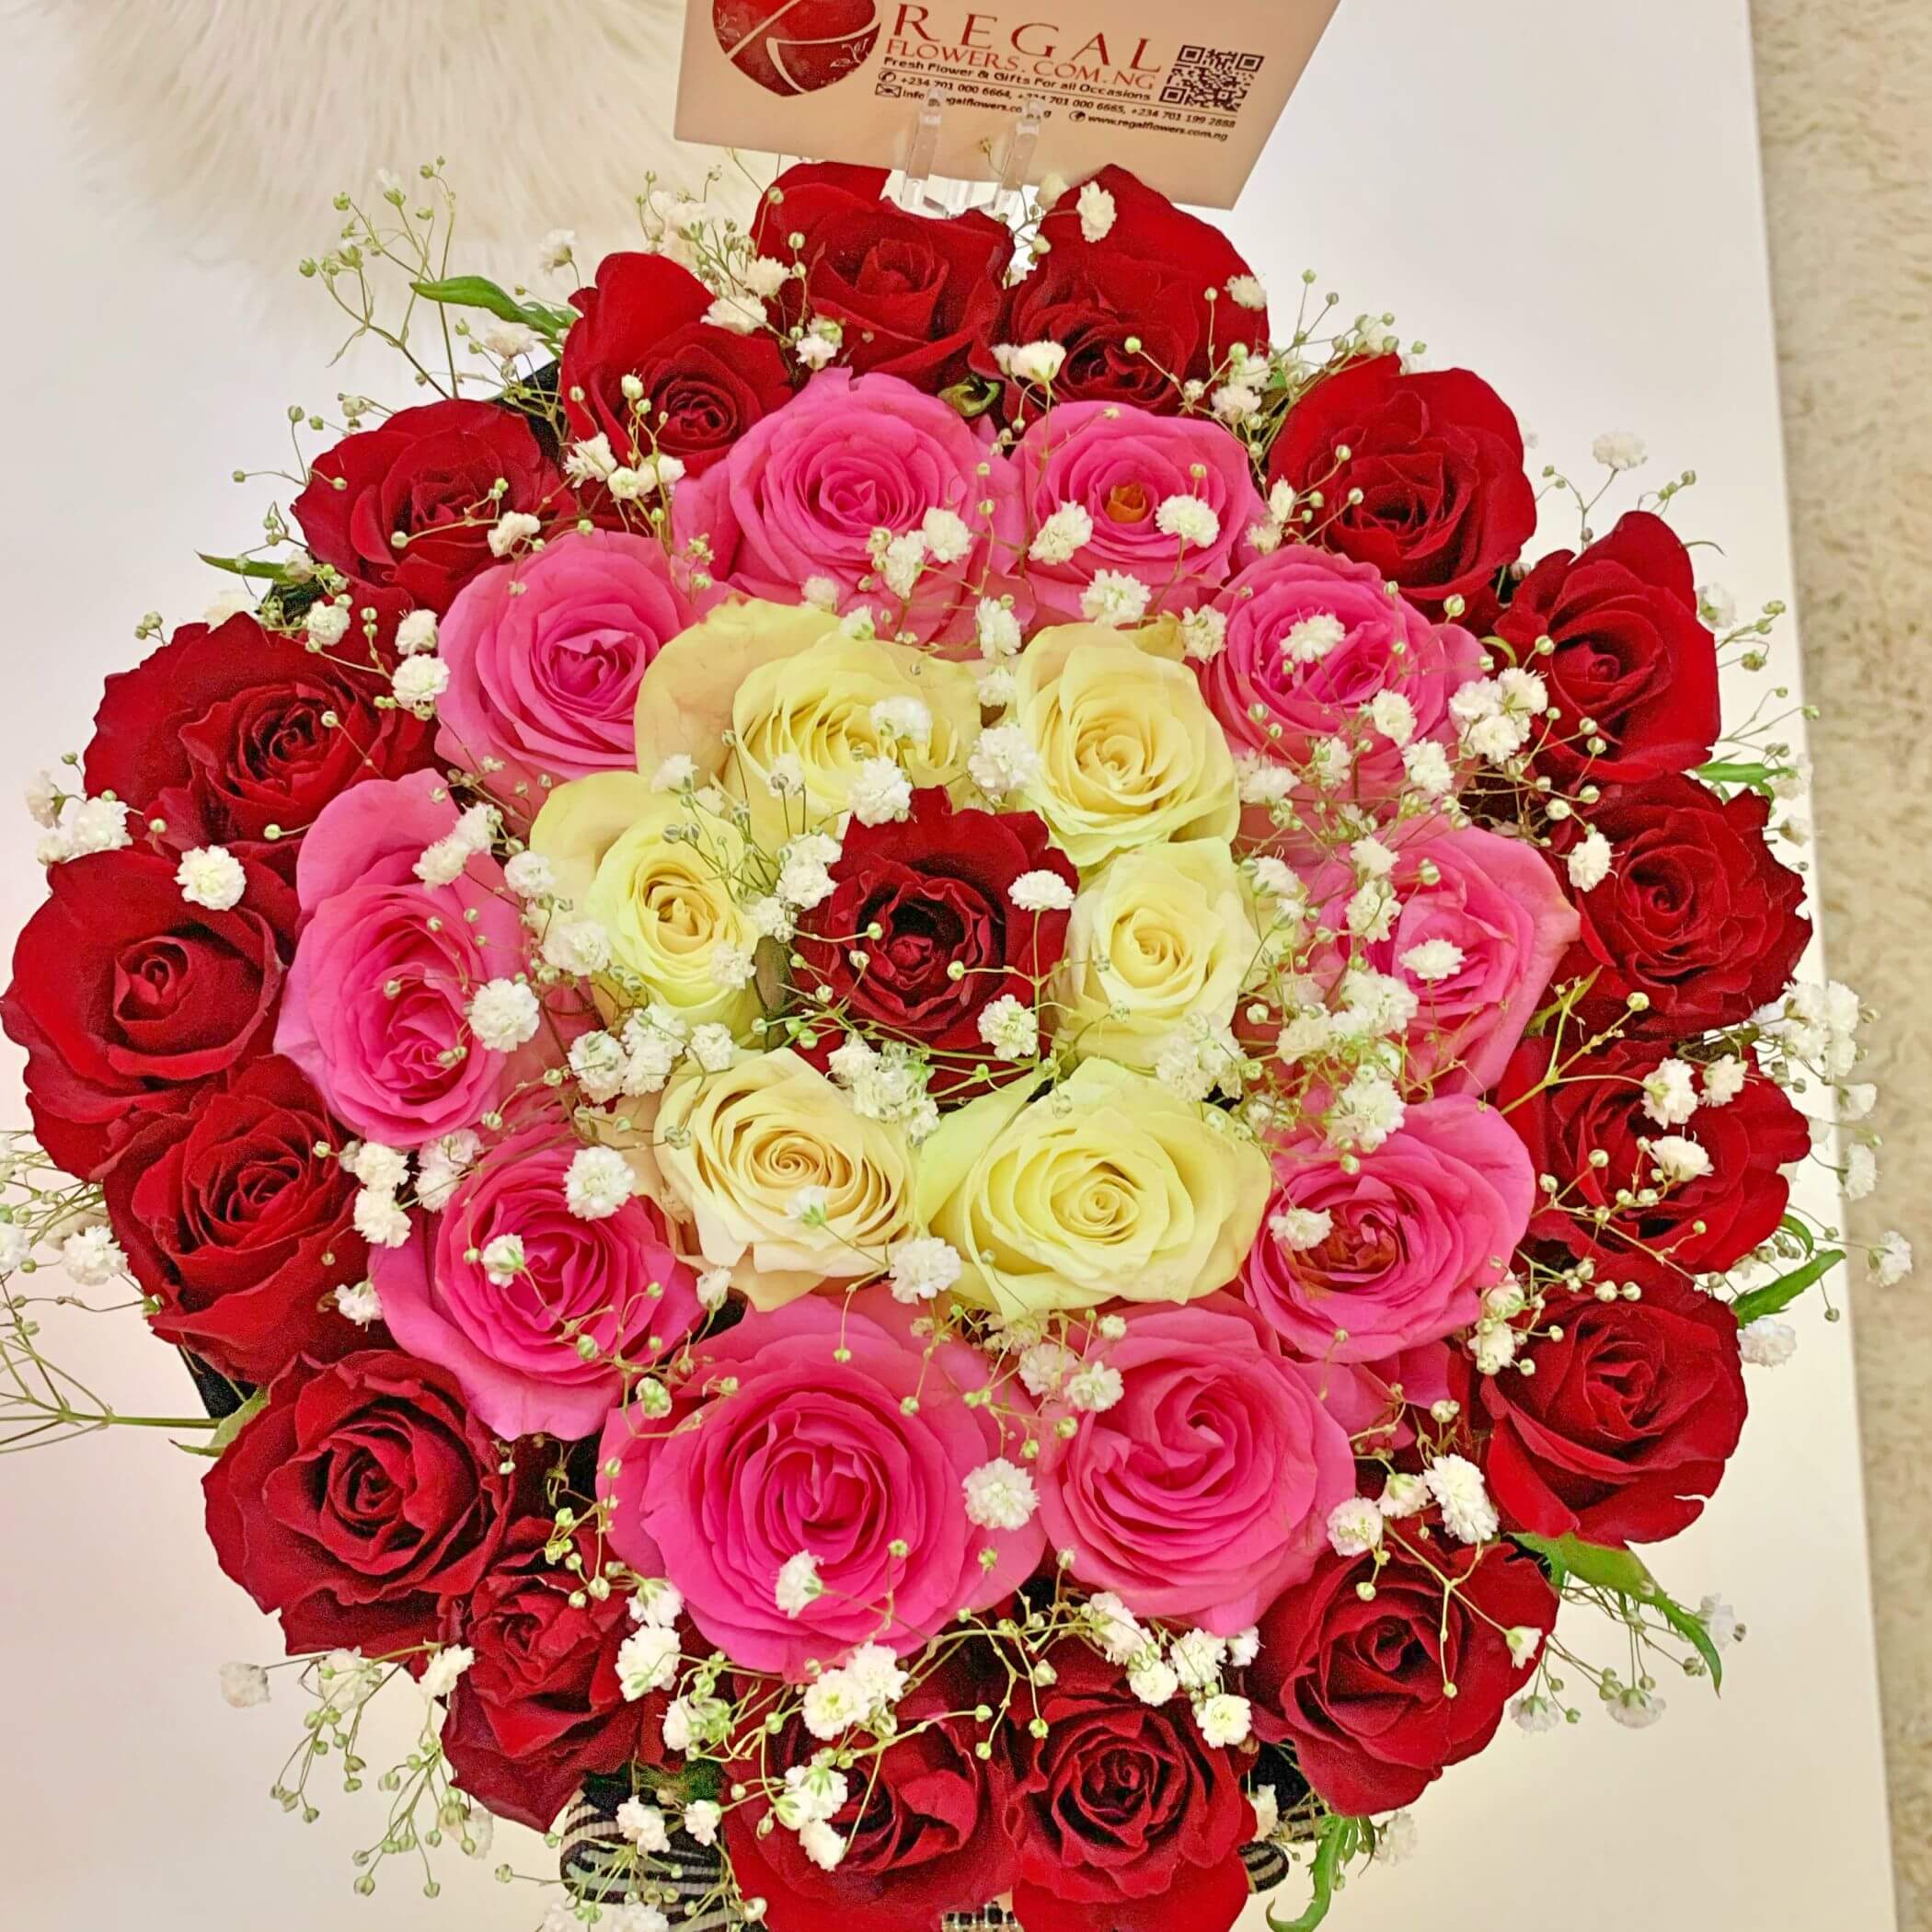 White Roses, Pink Roses and Red Roses with Gypso and Guylian Chocolate, bouquet of Flowers for her, Birthday Flowers, Same day flowers delivery in Lagos